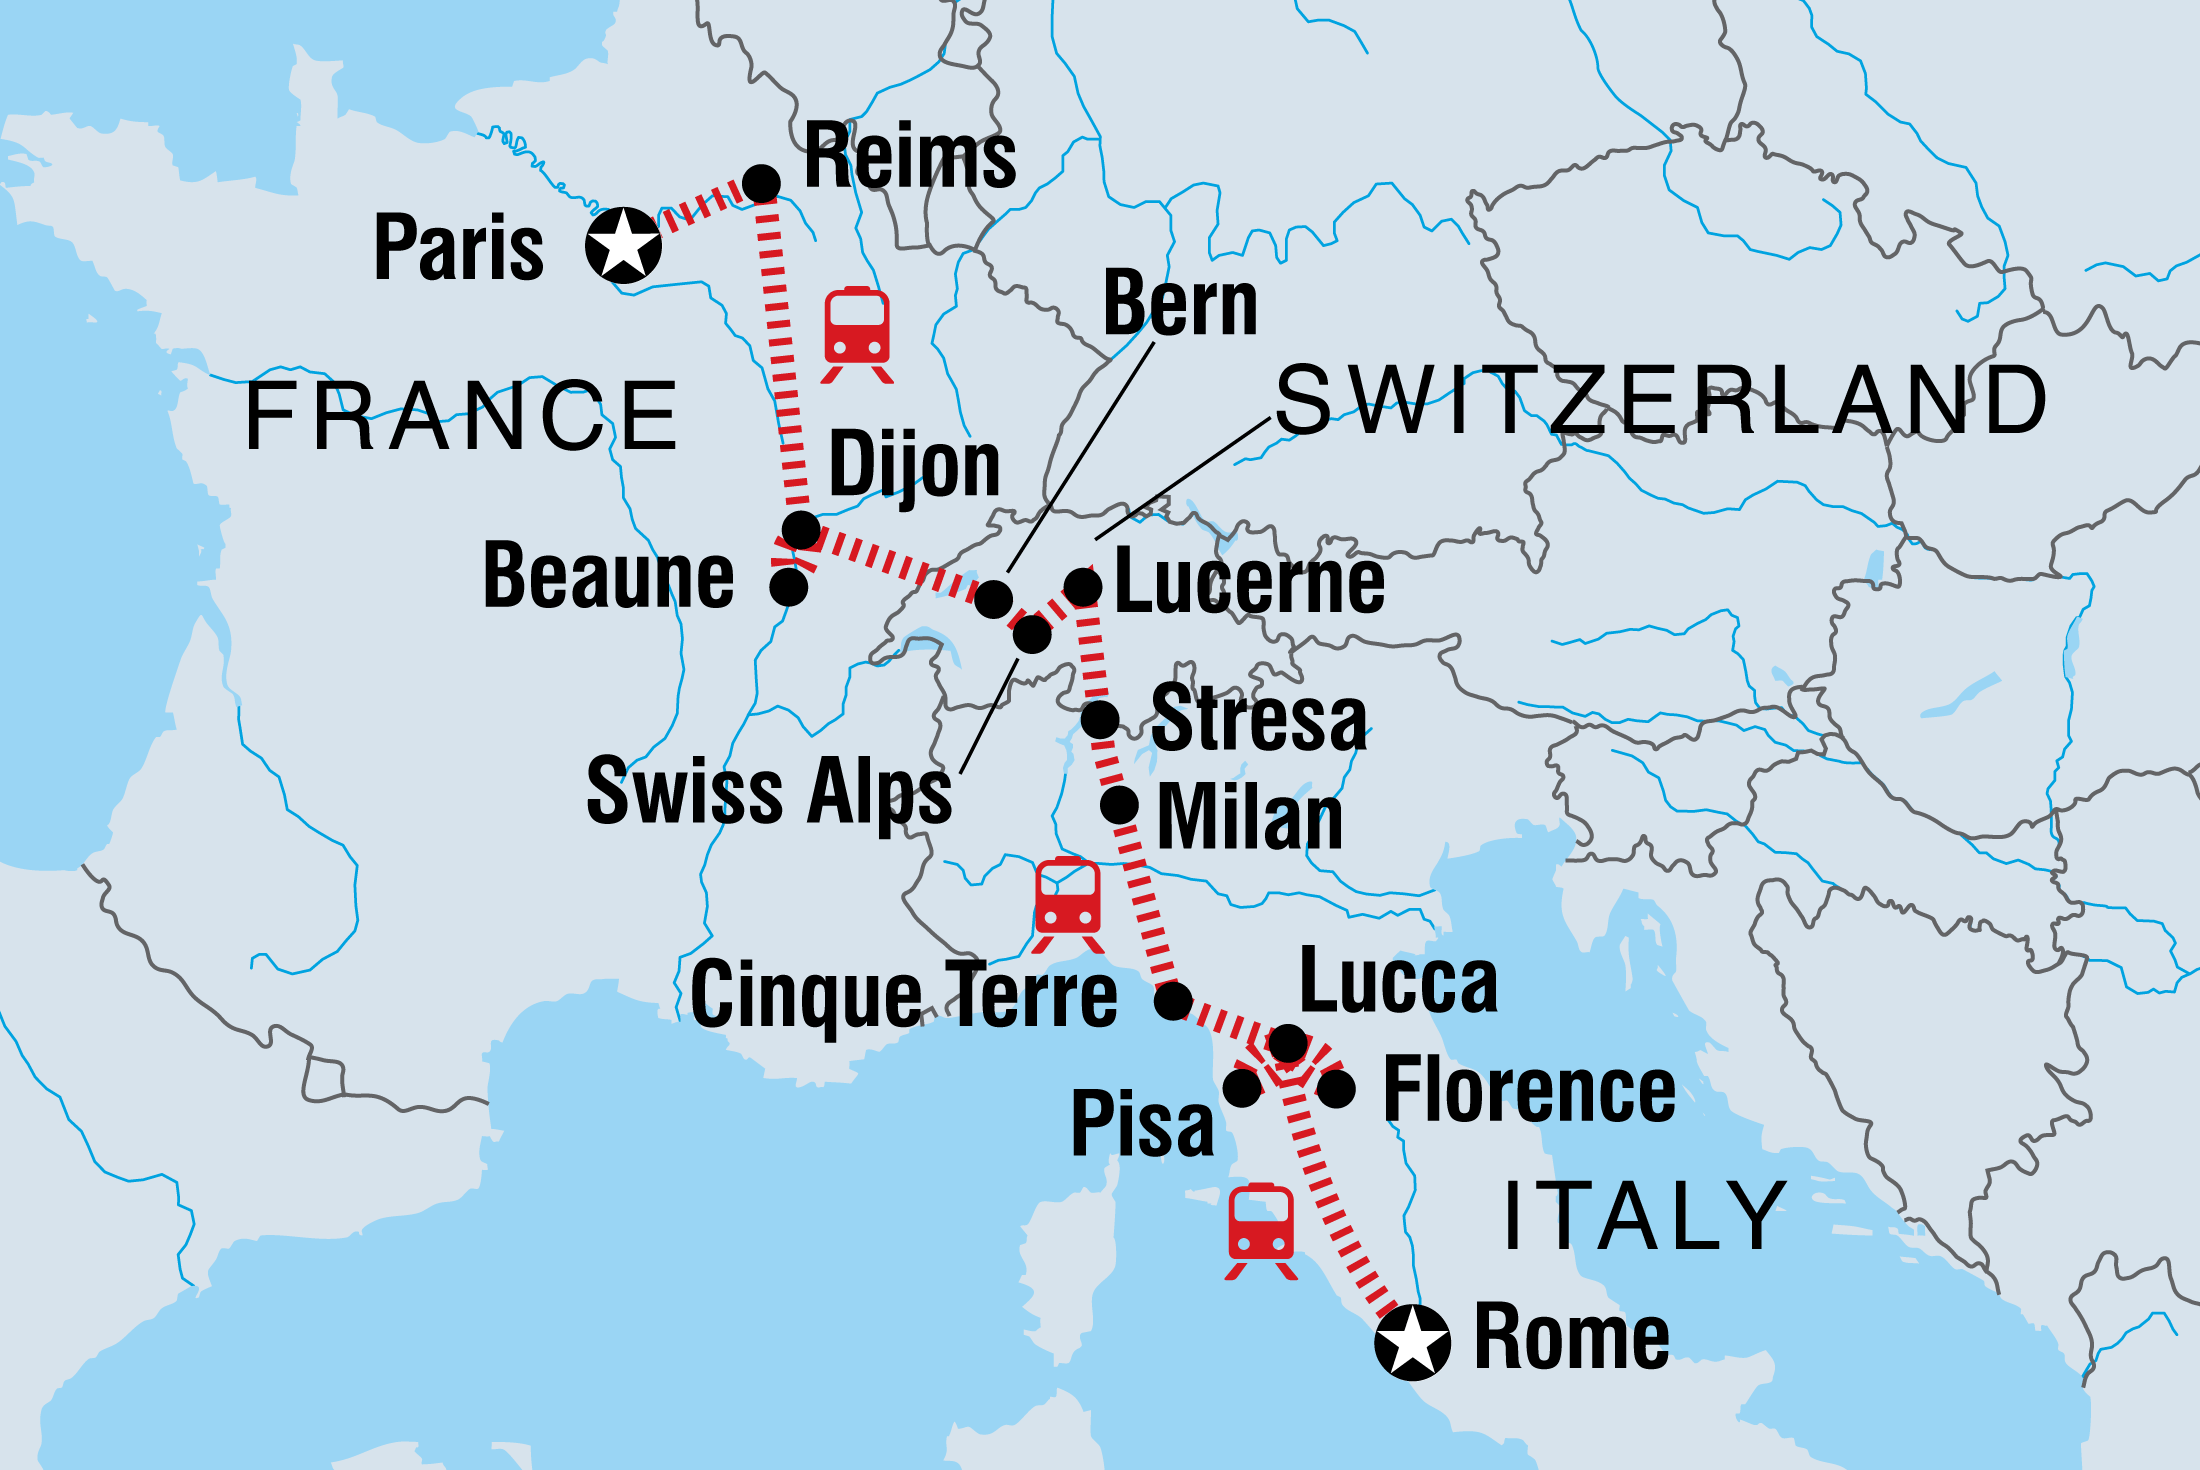 travel from paris france to rome italy